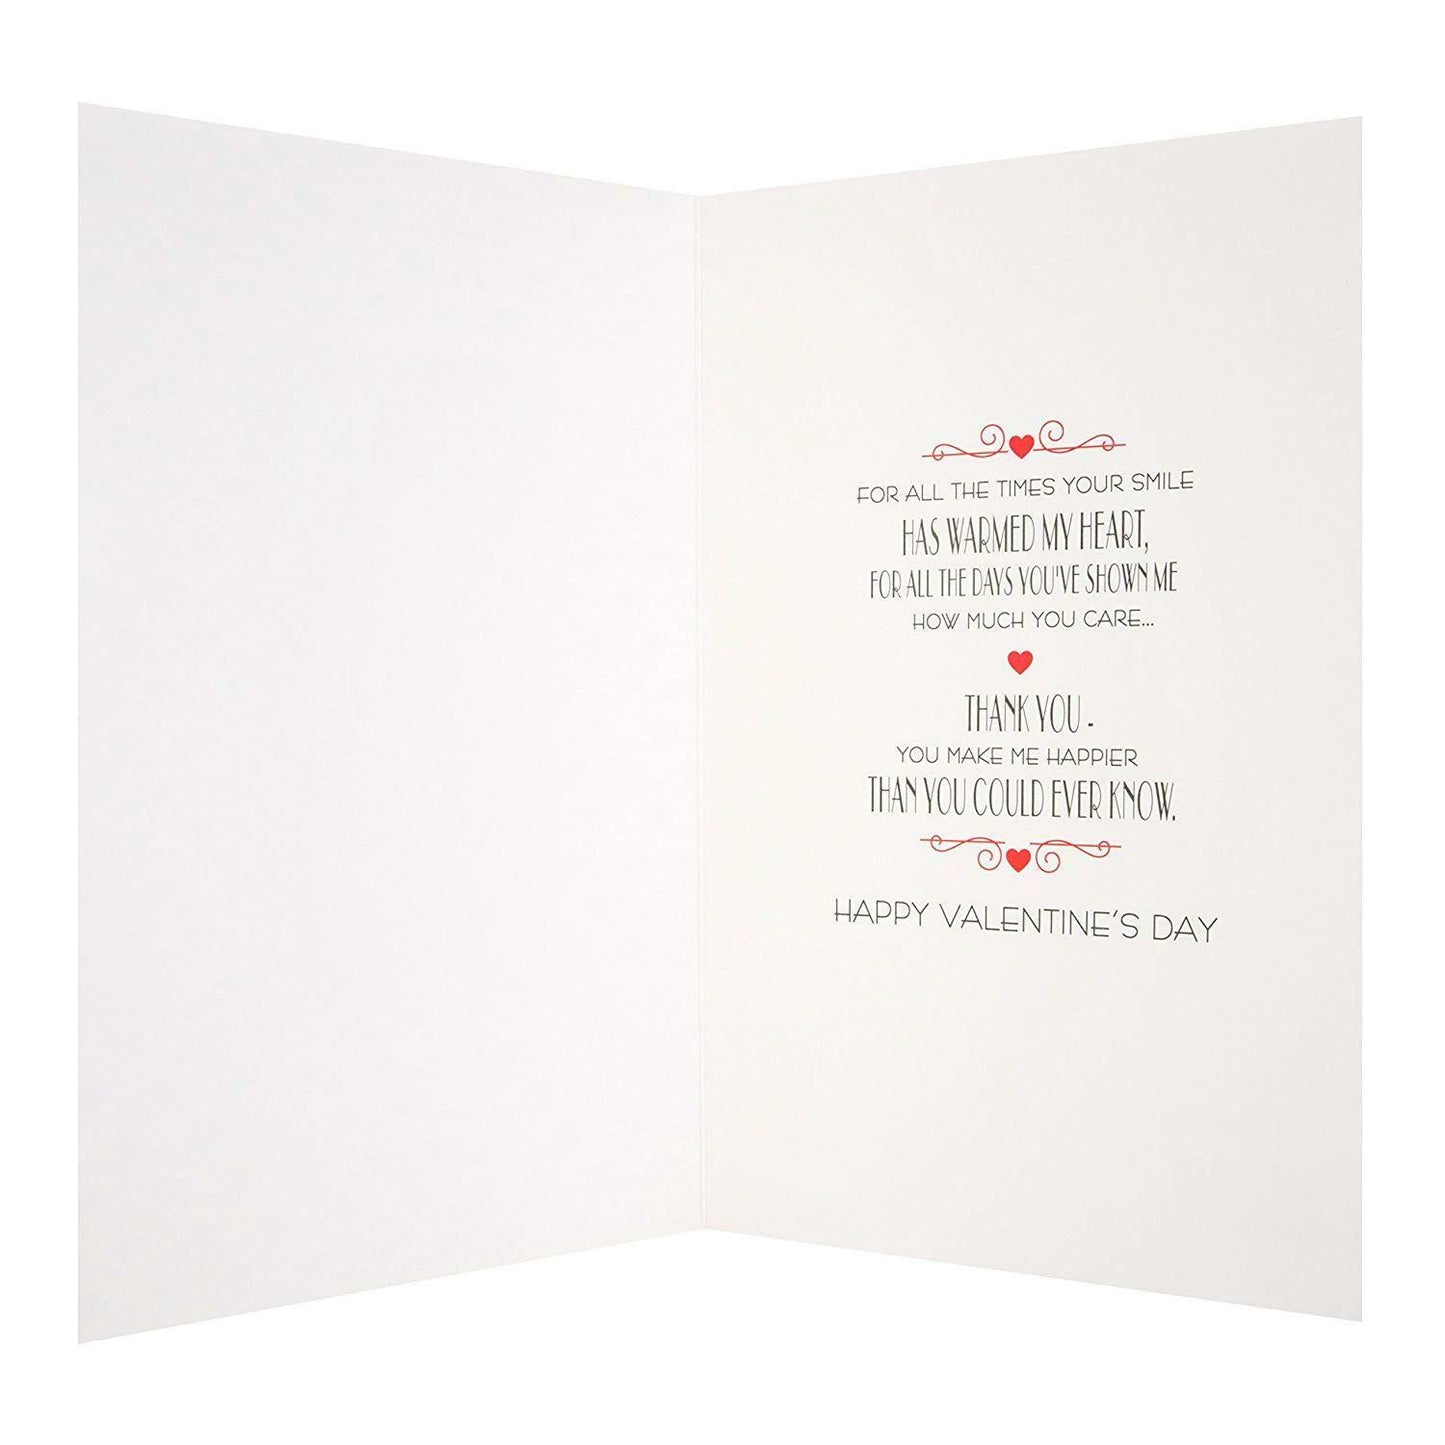 'Amazing Moments' Valentine's Day Card 